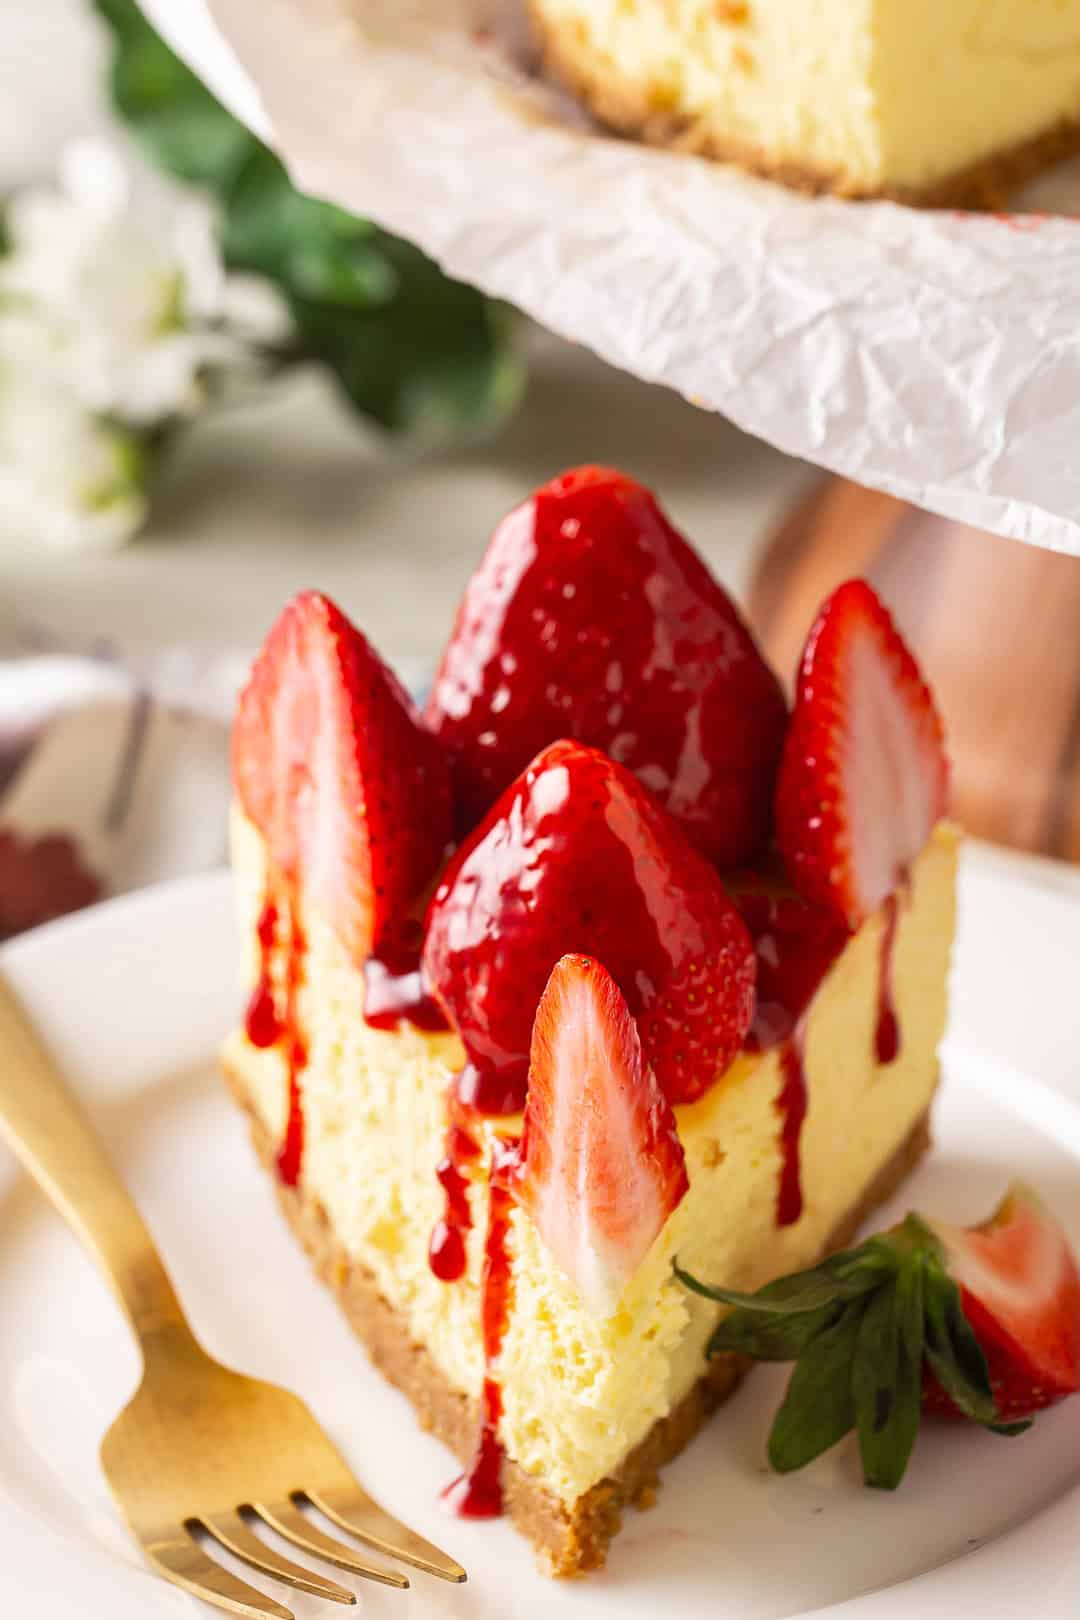 Cheesecake and strawberry on a white plate with a gold fork.